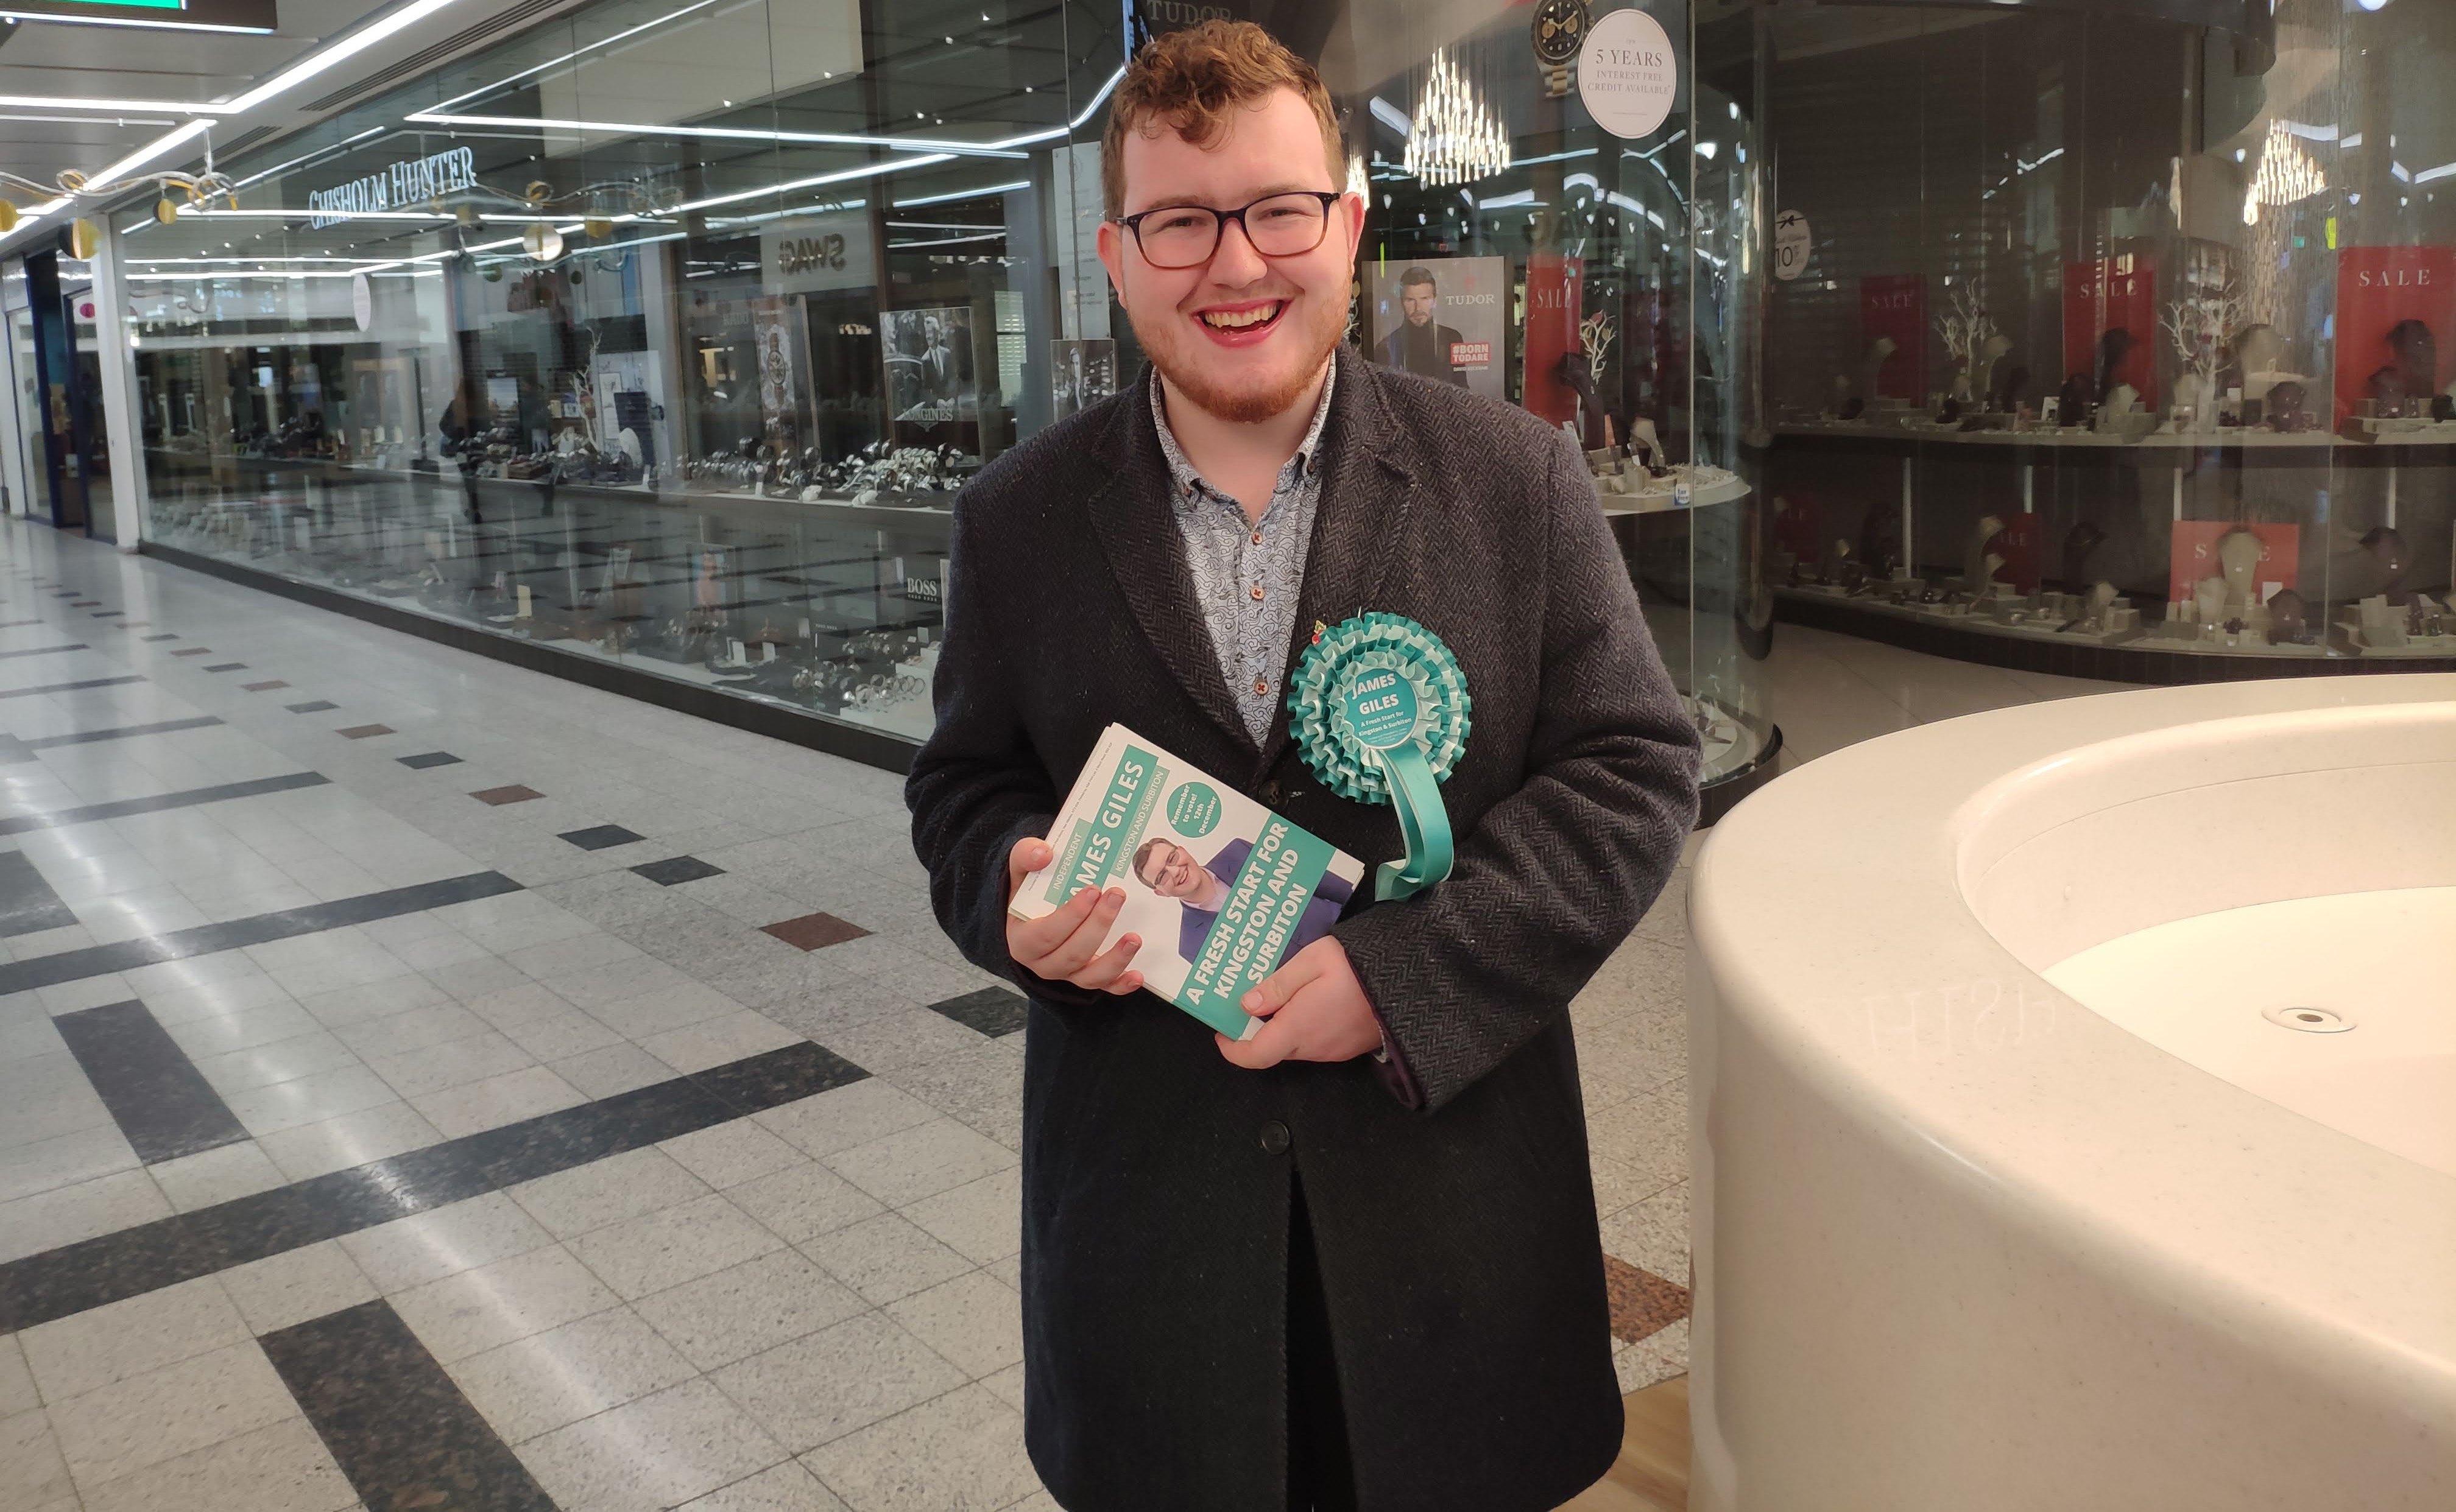 Kingston’s teenage election candidate says he’s “in it to win it”